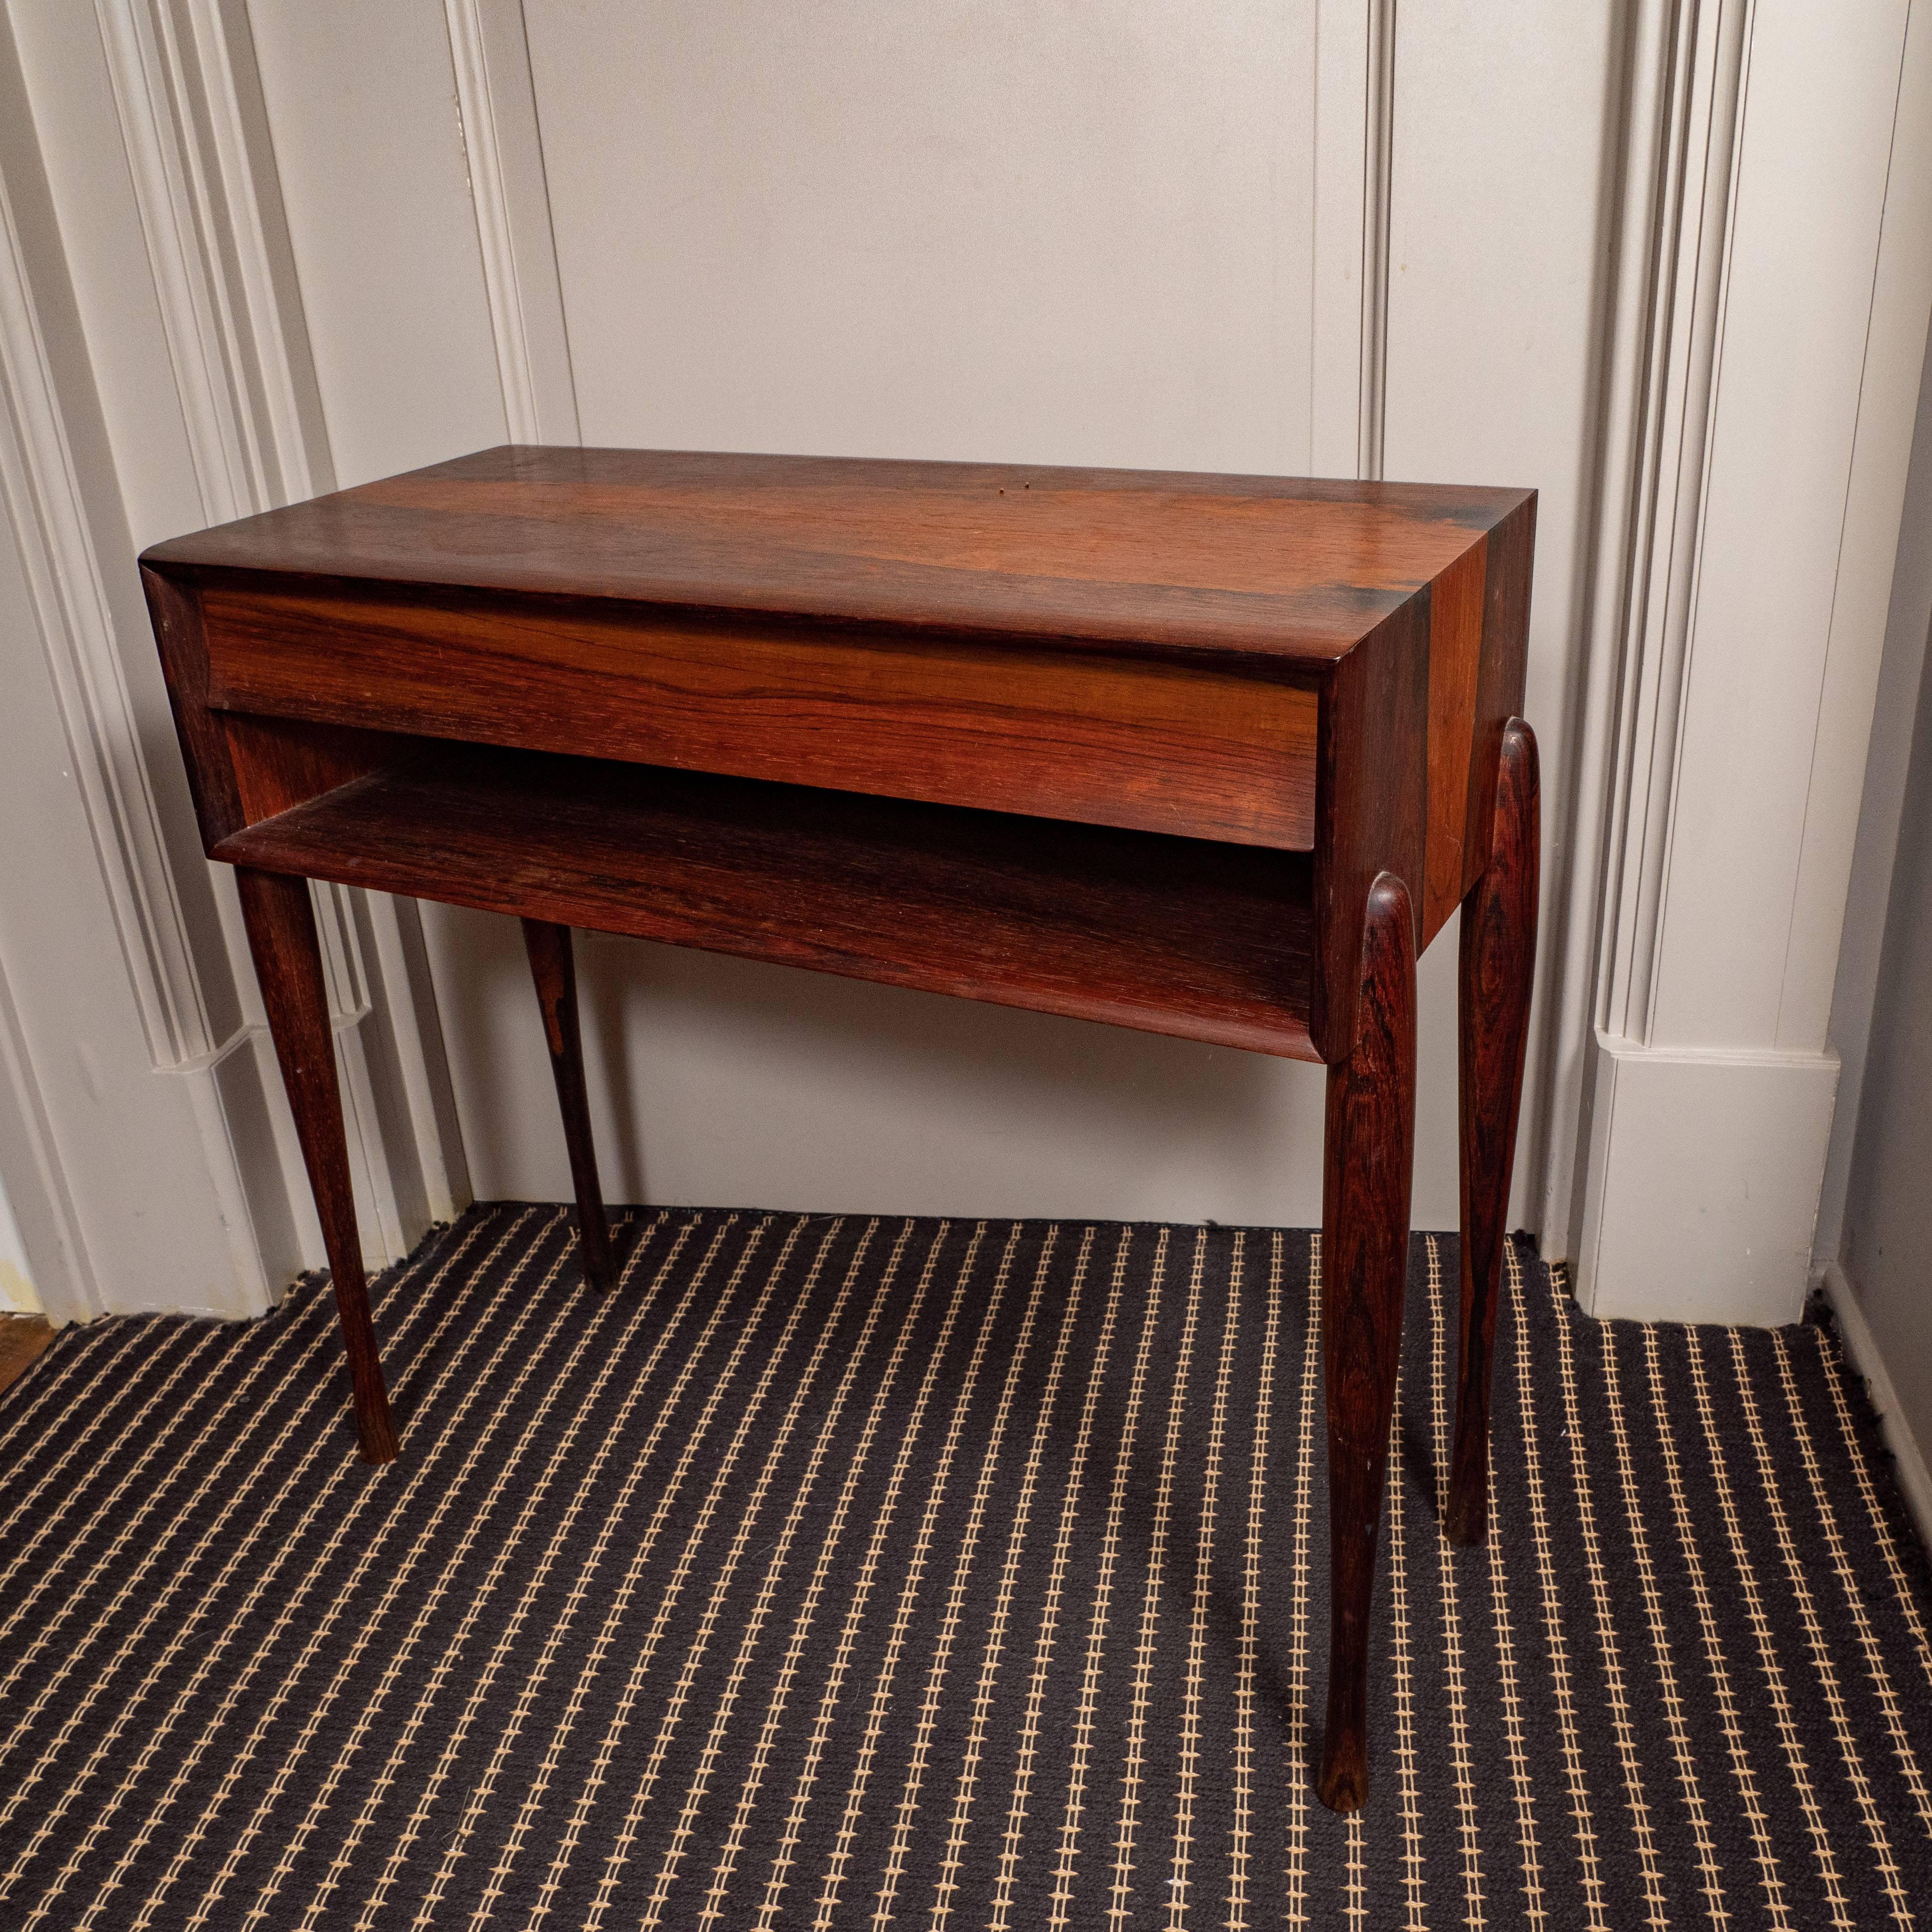 Midcentury side table with shelf. This is a stunning side table with beautiful section of the tree showing lots of variation. The legs are particularly lovely, a rounded taper exposed from the sides. This is a lovely midcentury piece. Probably